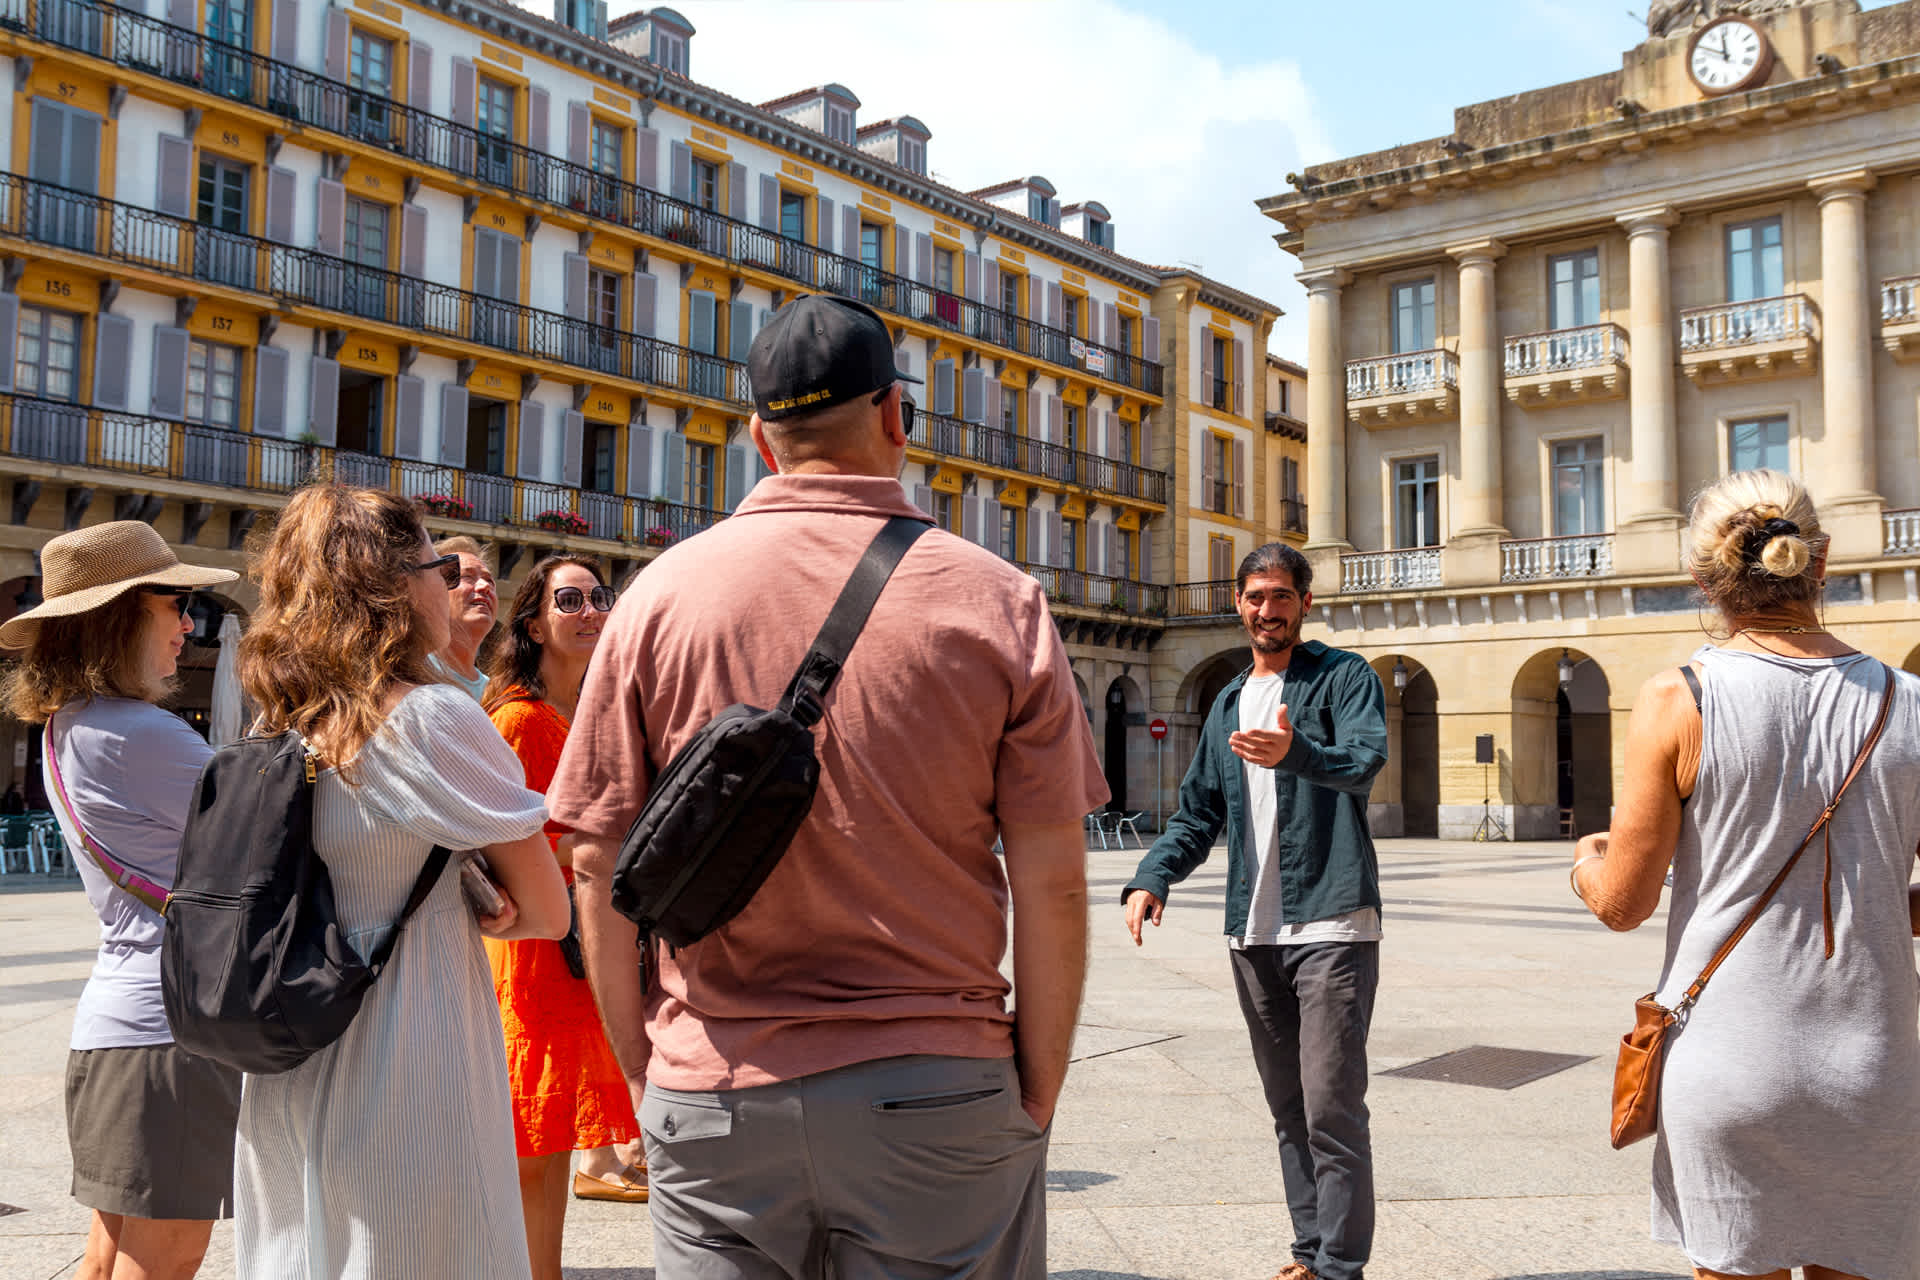 A group of people standing in a plaza listening to a tour guide